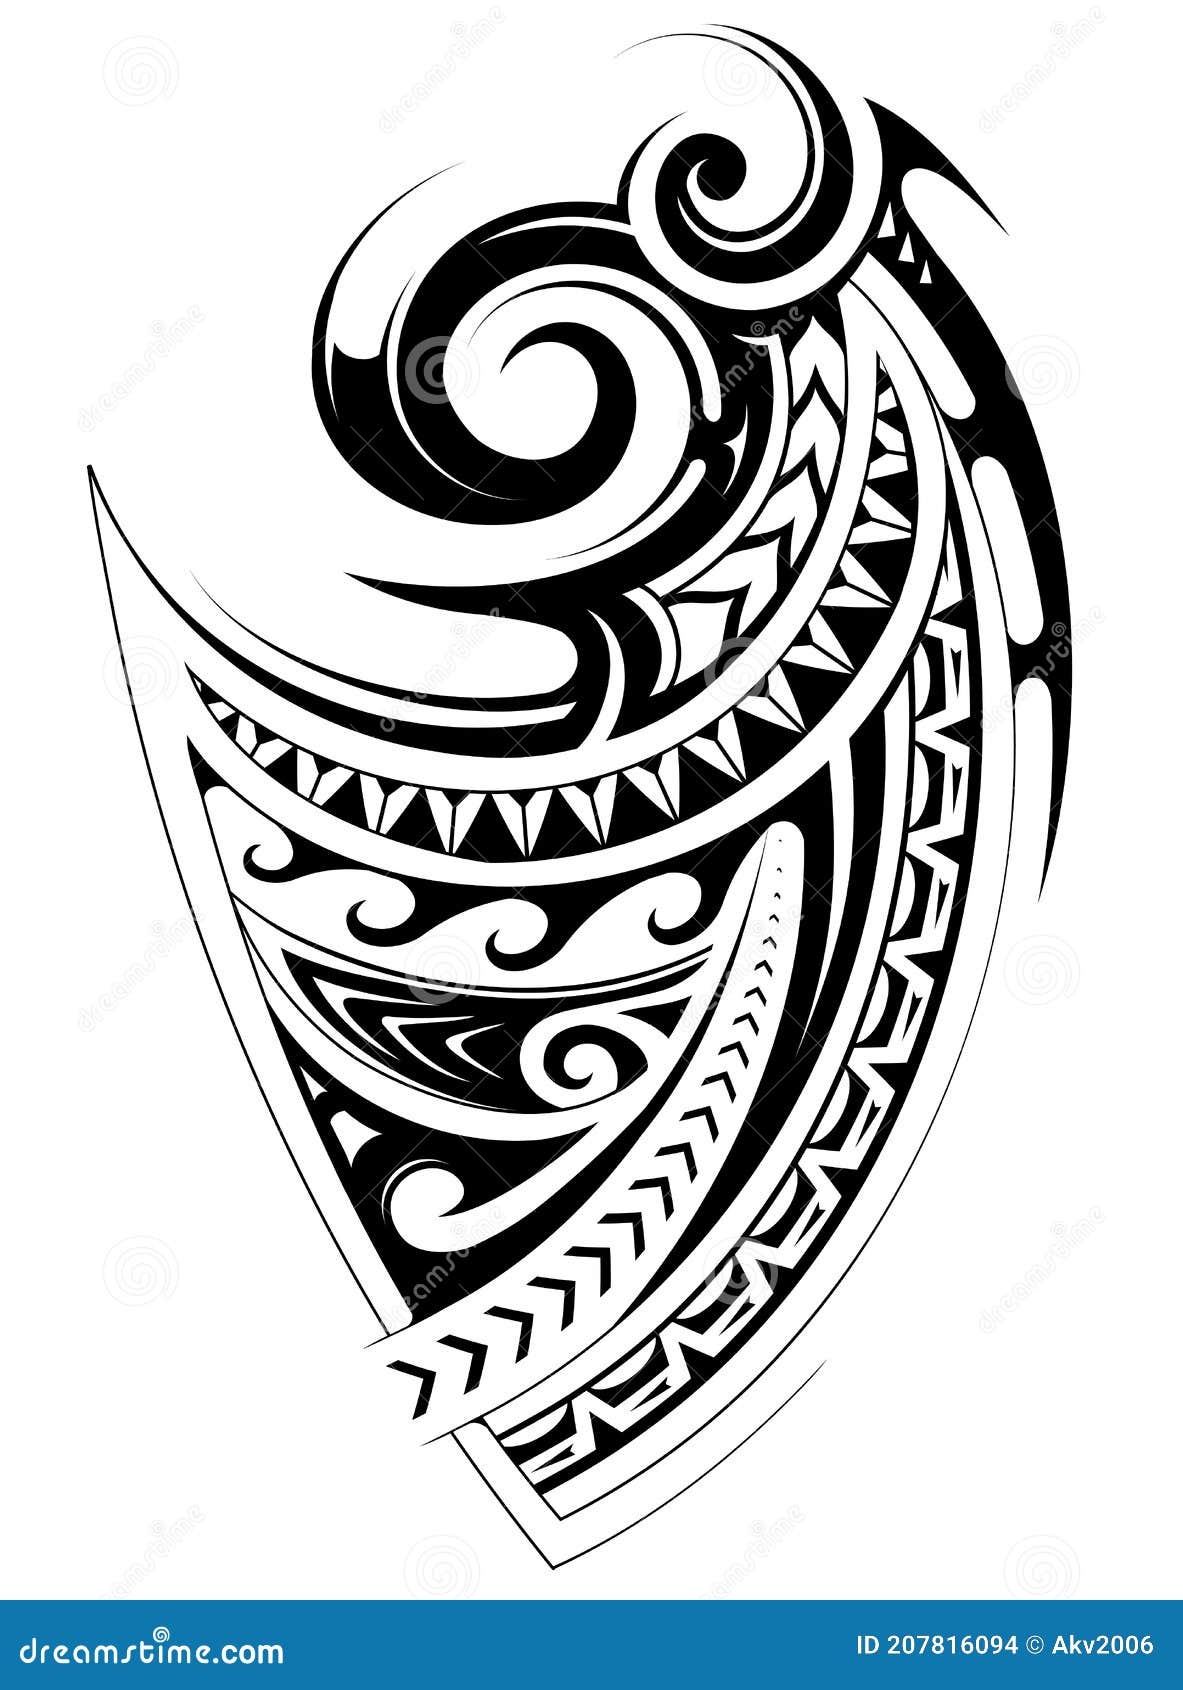 Maori Shoulder Tattoo: Over 9,775 Royalty-Free Licensable Stock  Illustrations & Drawings | Shutterstock